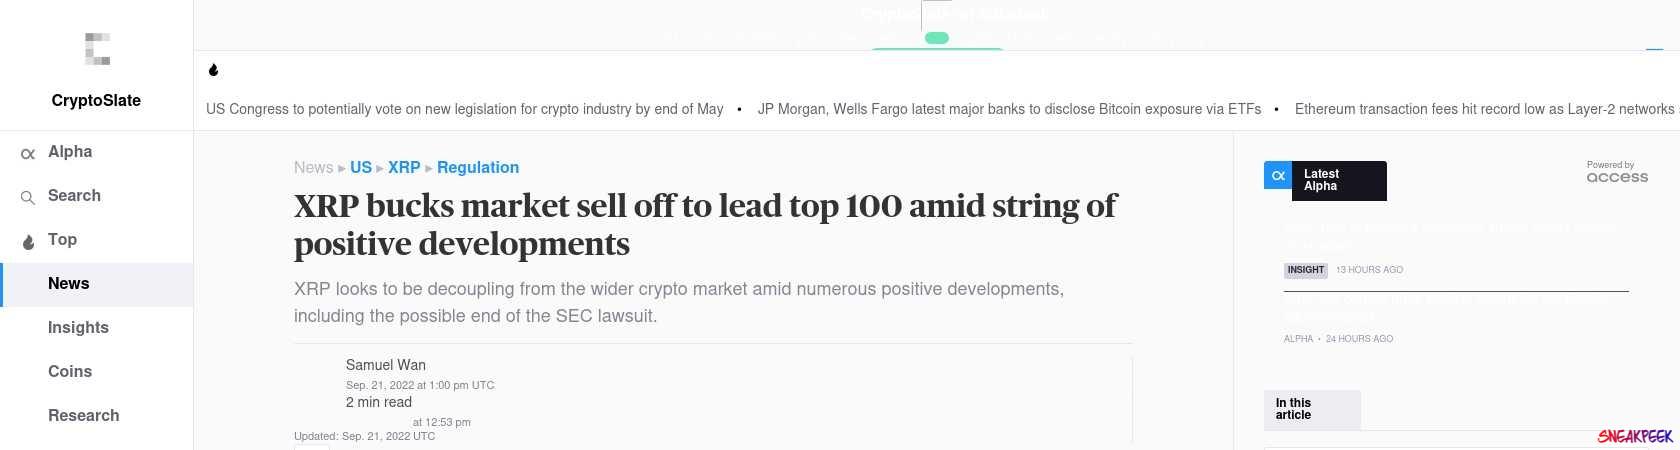 Read the full Article:  ⭲ XRP bucks market sell off to lead top 100 amid string of positive developments